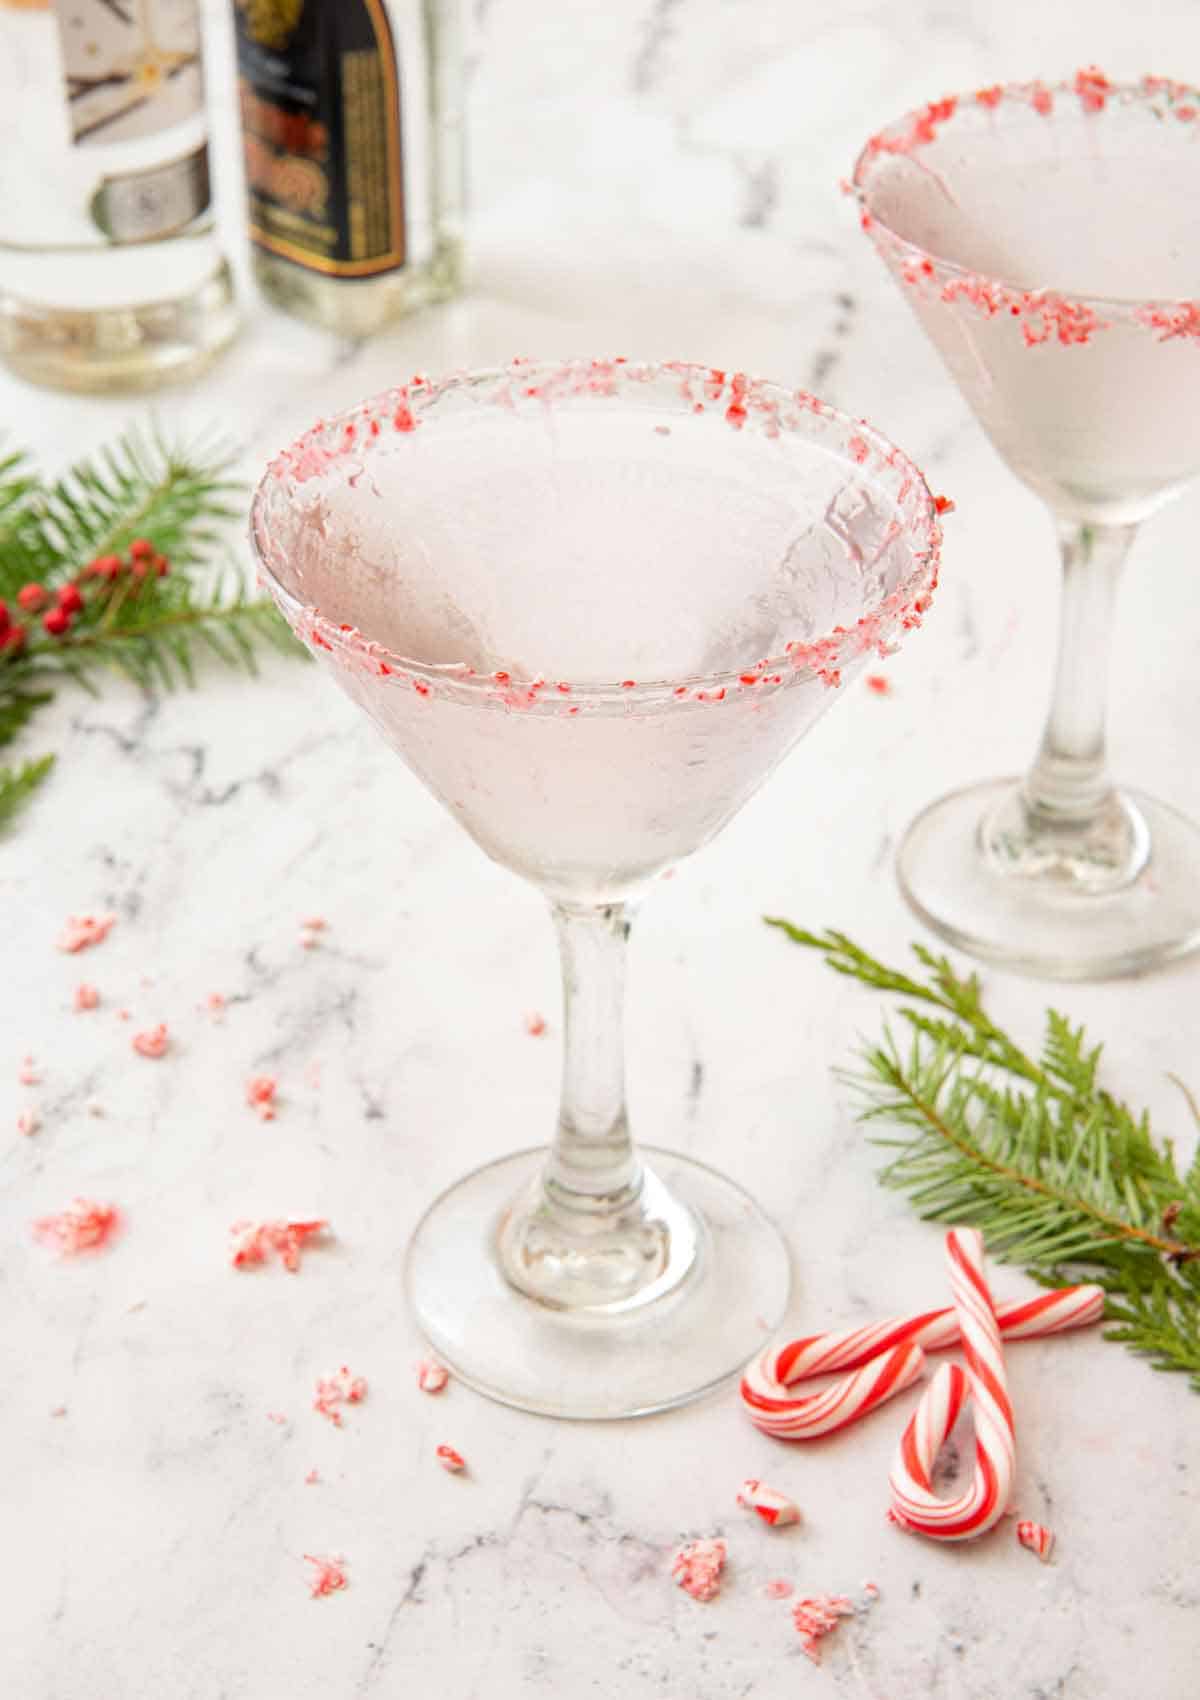 Two peppermint martinis with crushed and whole candy canes scattered around with festive garnishes on the counter.